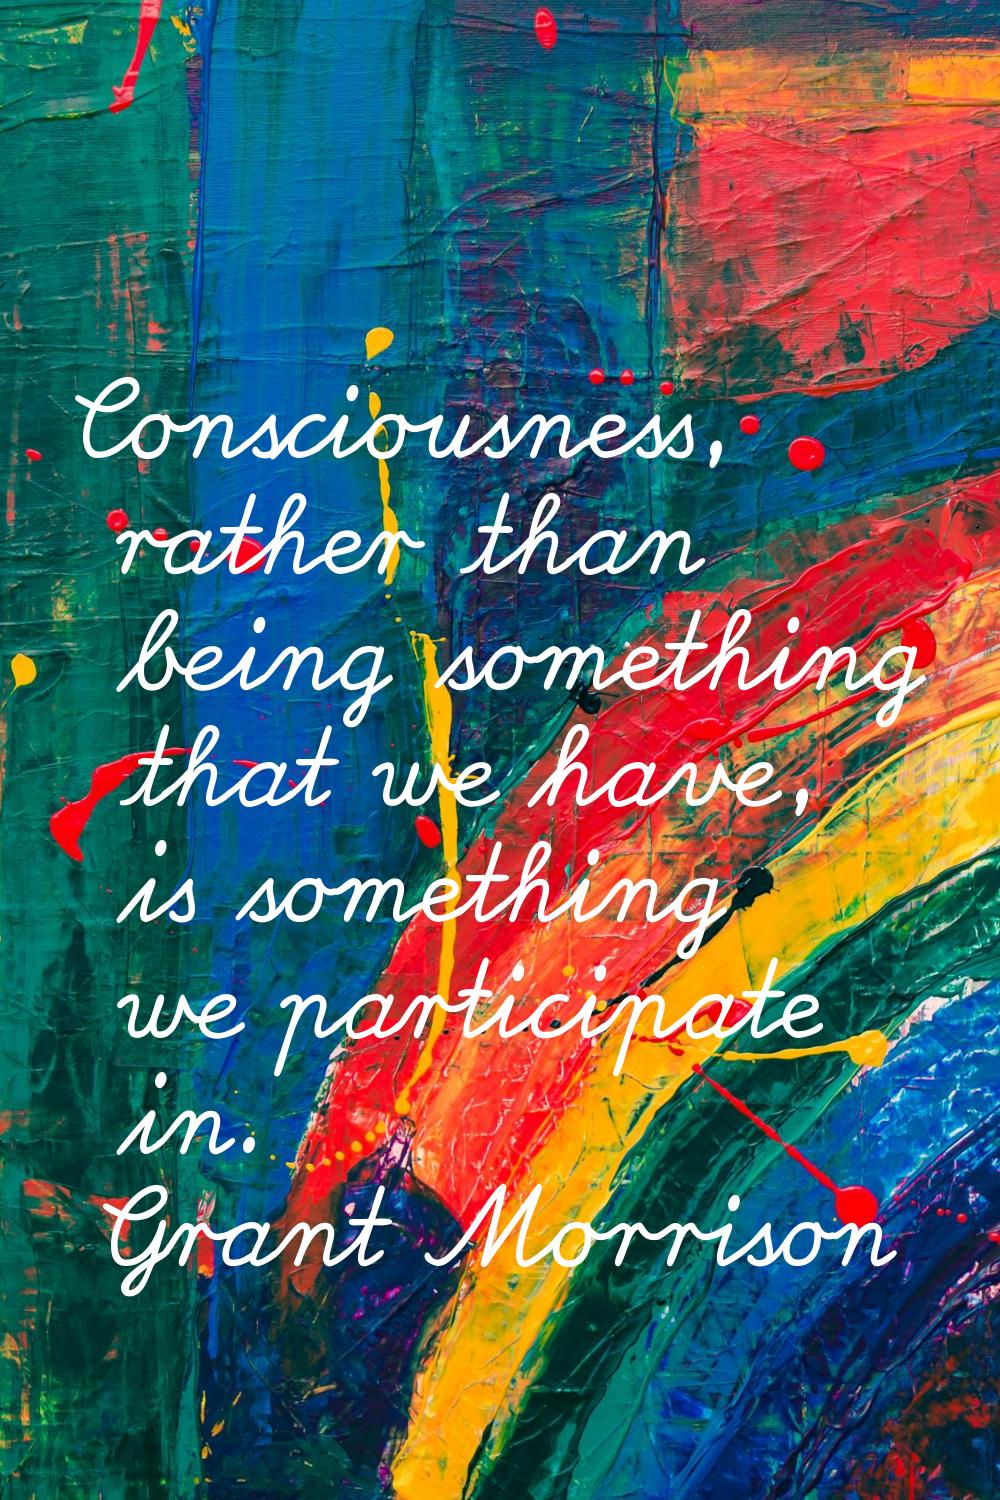 Consciousness, rather than being something that we have, is something we participate in.